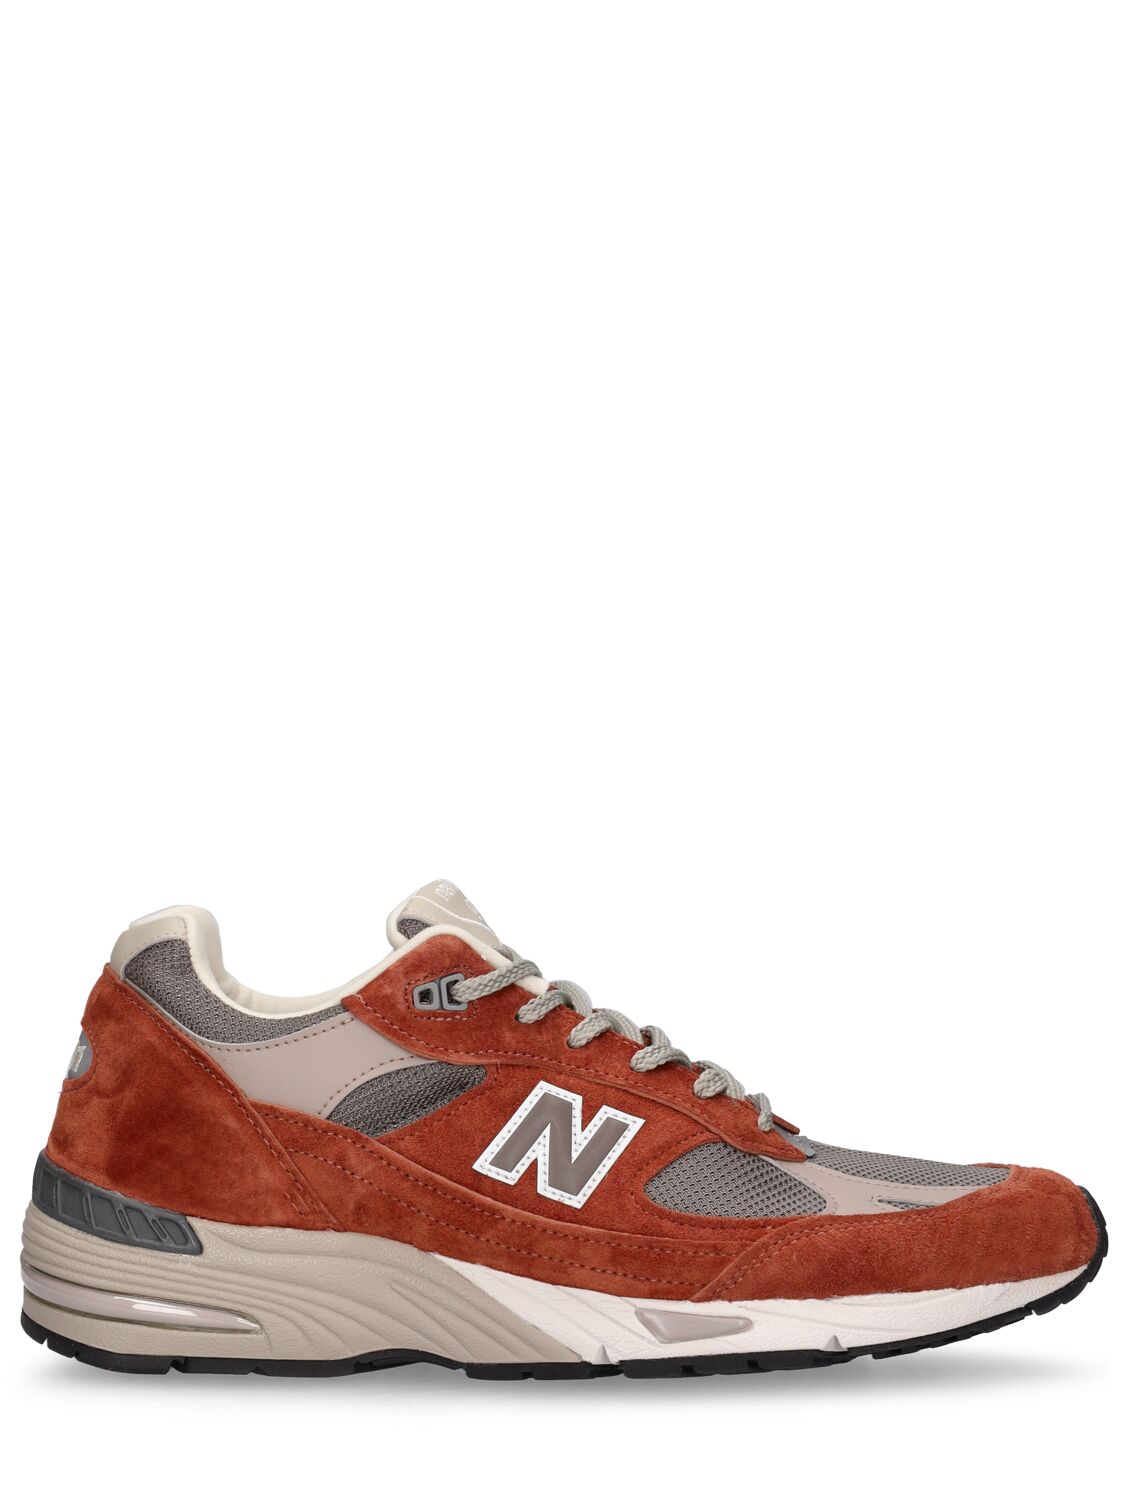 NEW BALANCE 991 MADE IN UK trainers